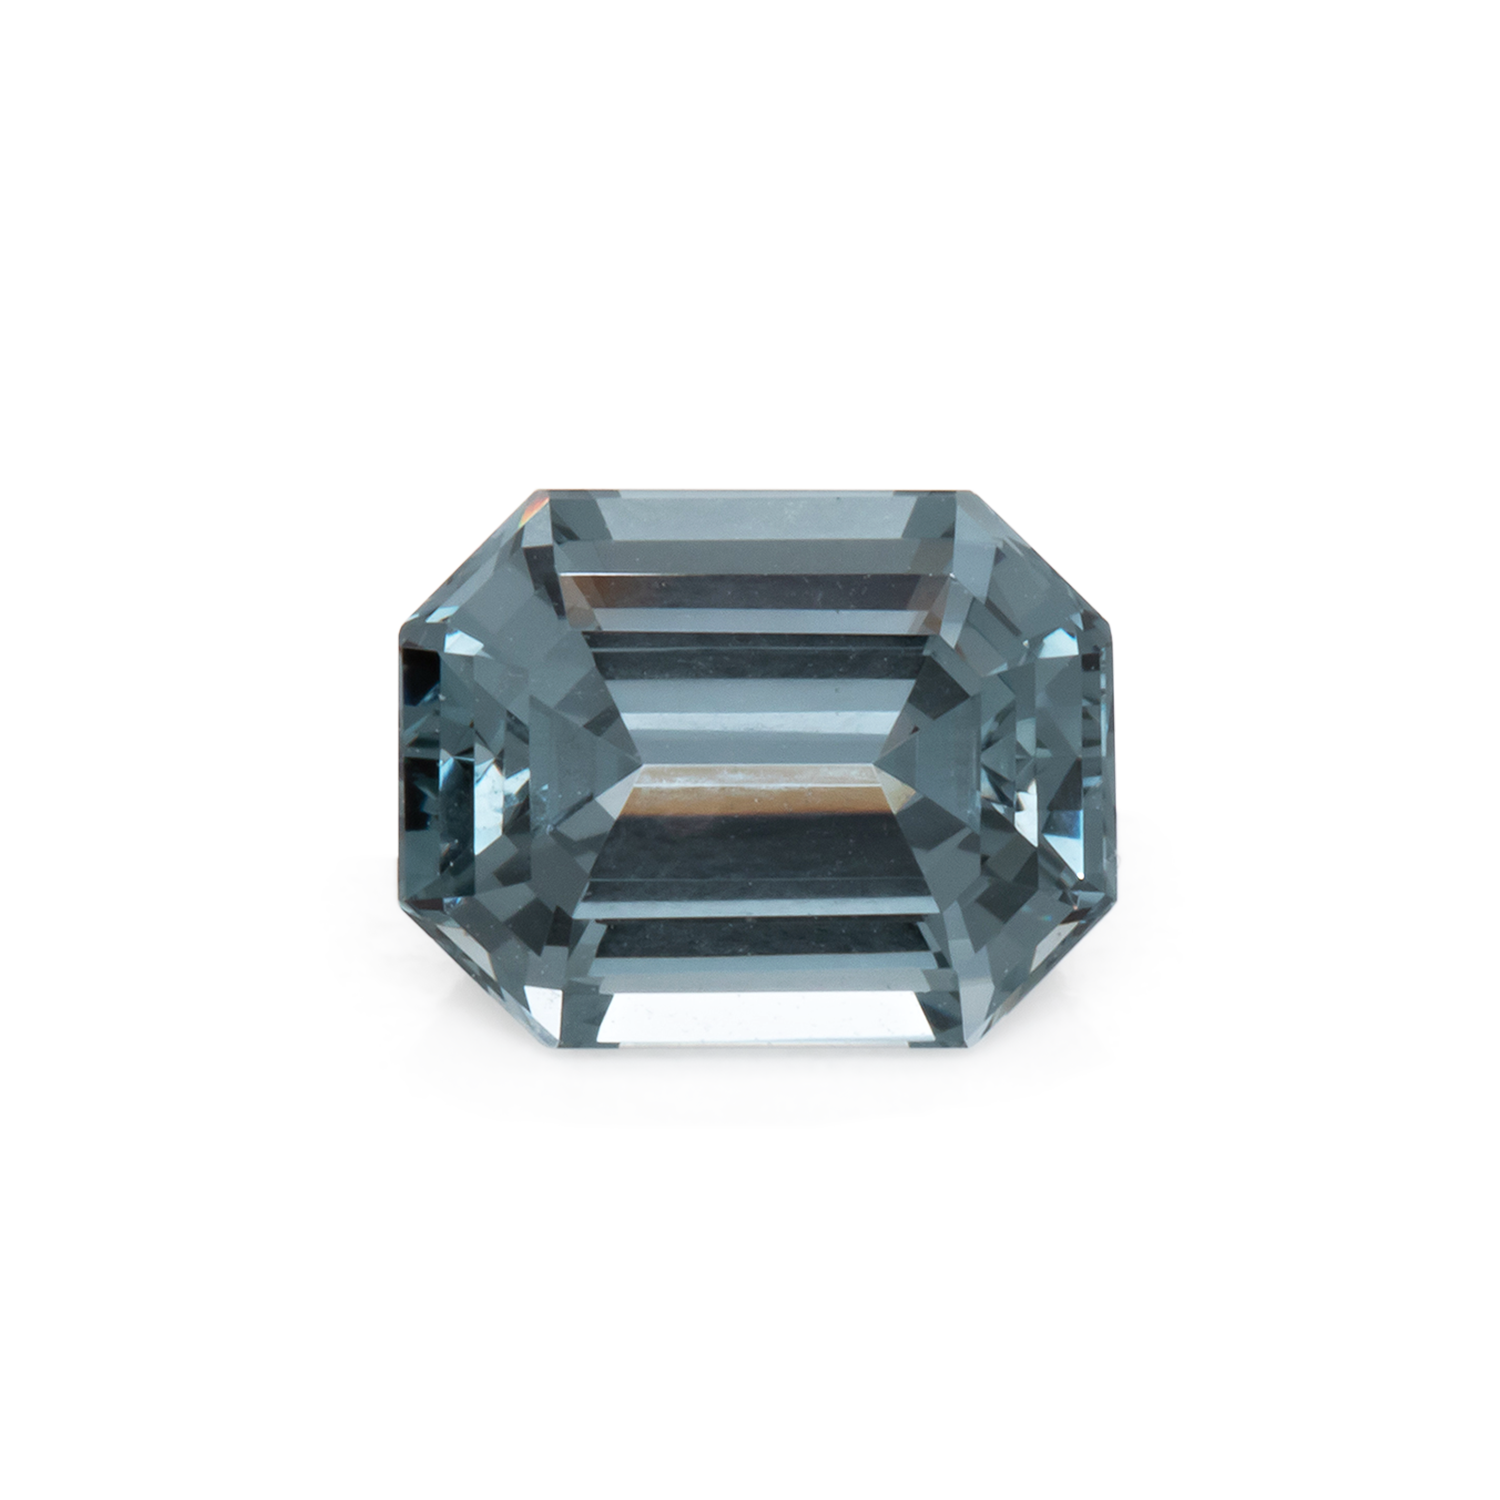 Spinel - grey, octagon, 8x6.2 mm, 1.71 cts, No. SP90043